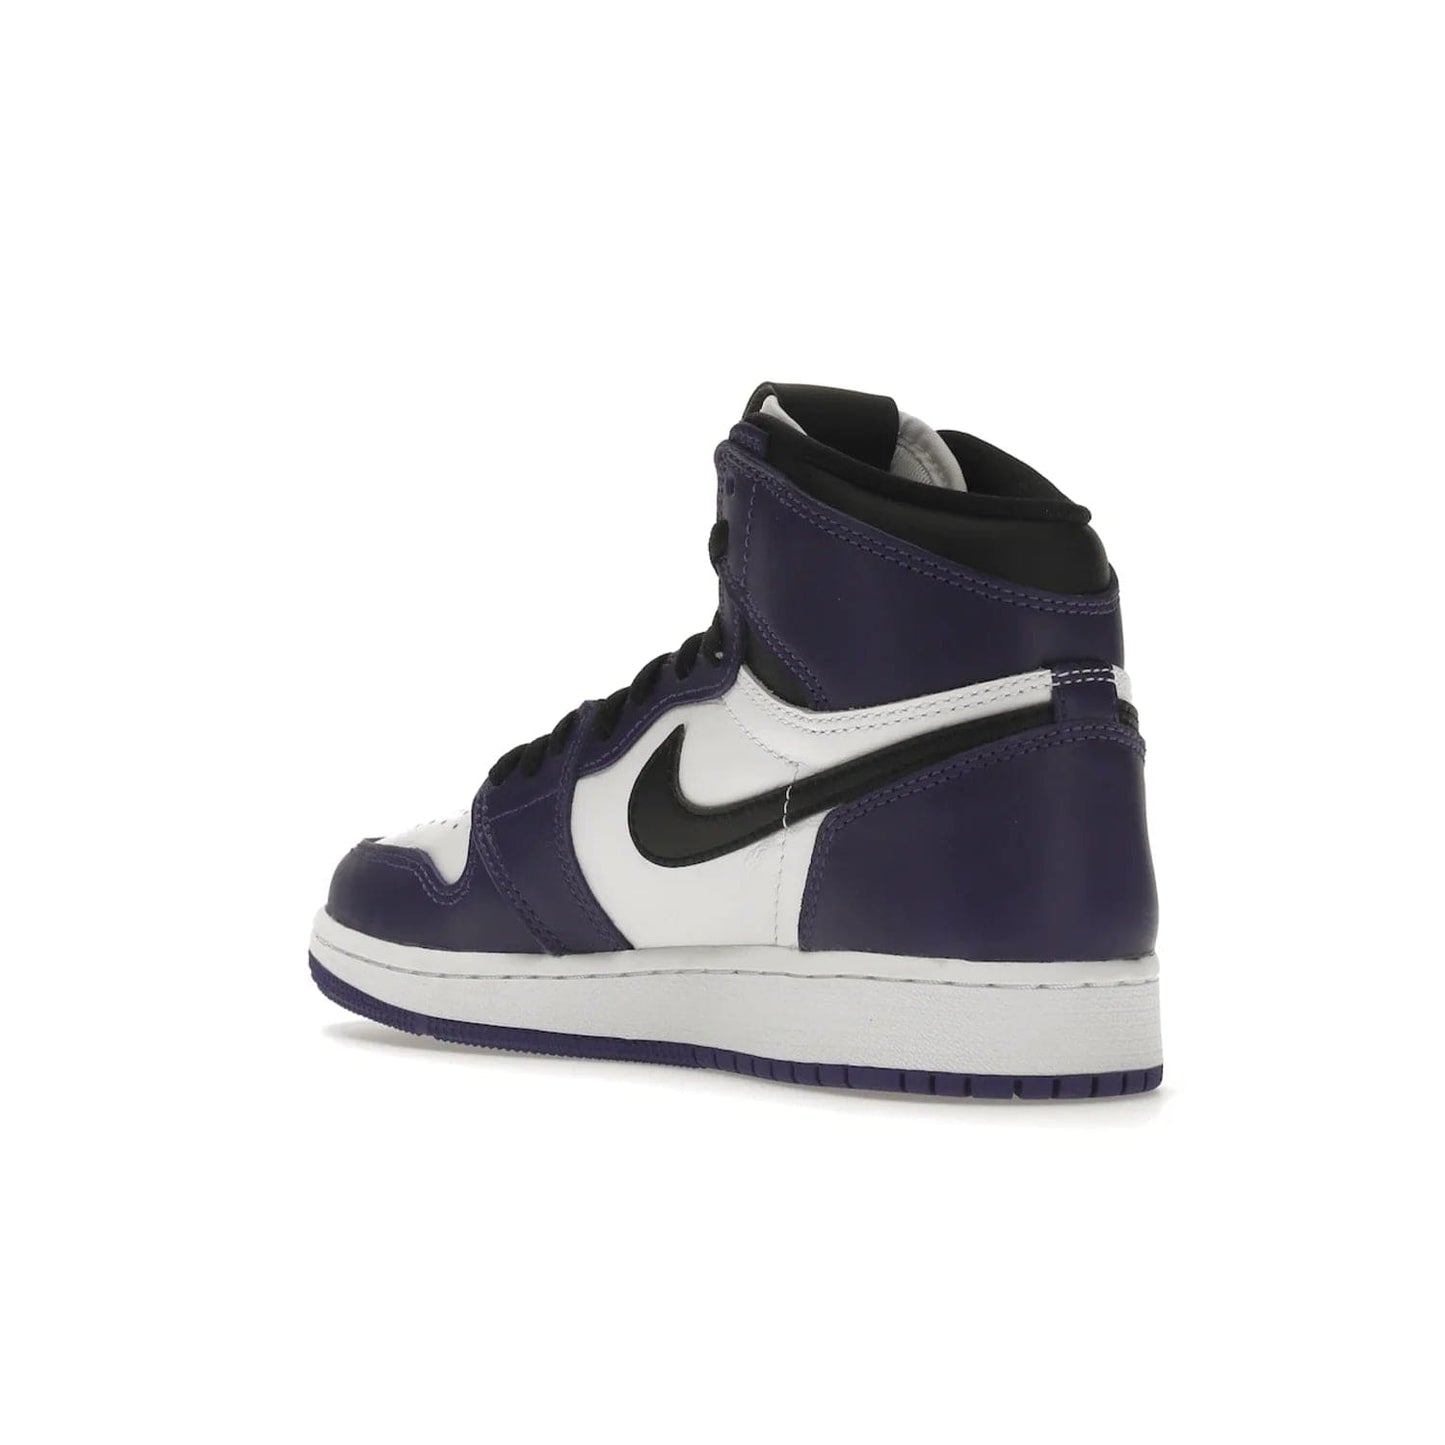 Jordan 1 Retro High Court Purple White (GS) - Image 24 - Only at www.BallersClubKickz.com - The Air Jordan 1 Retro High Court Purple is here and young sneaker heads can show off classic style. Features a white tumbled leather upper, black swoosh, purple overlays, black collar with purple overlay, white tongue, black patch with purple Nike Air logo and swoosh, white midsole, and purple rubber outsole with circular pattern.